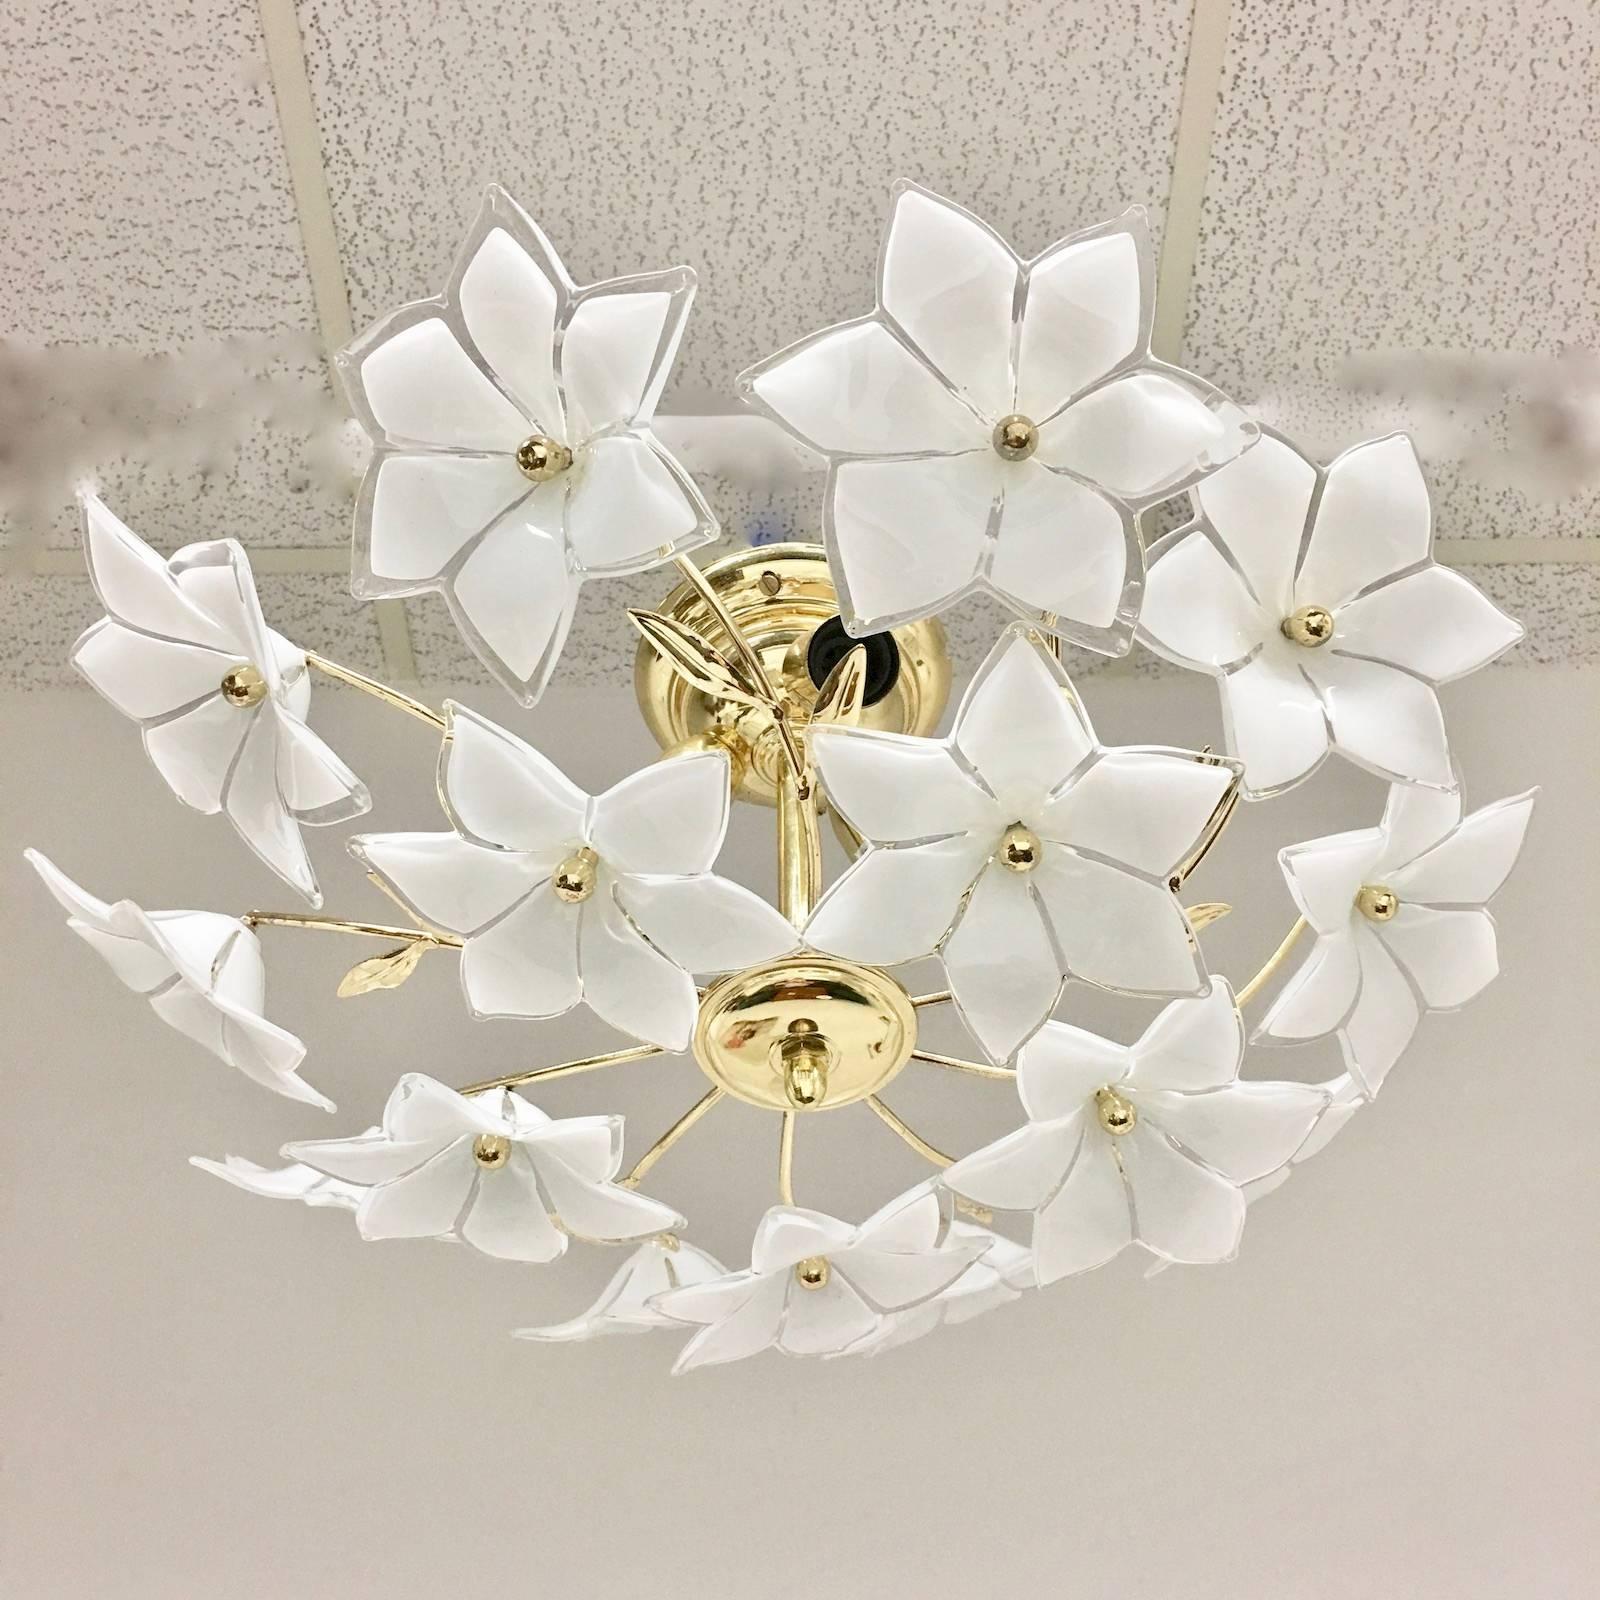 Beautiful Elegant and petite Italian wall light or flush mount with Murano glass flowers. The fixture requires three E 14 bulbs up to 40 watts each. A lovely Wall or Flush Mount. 